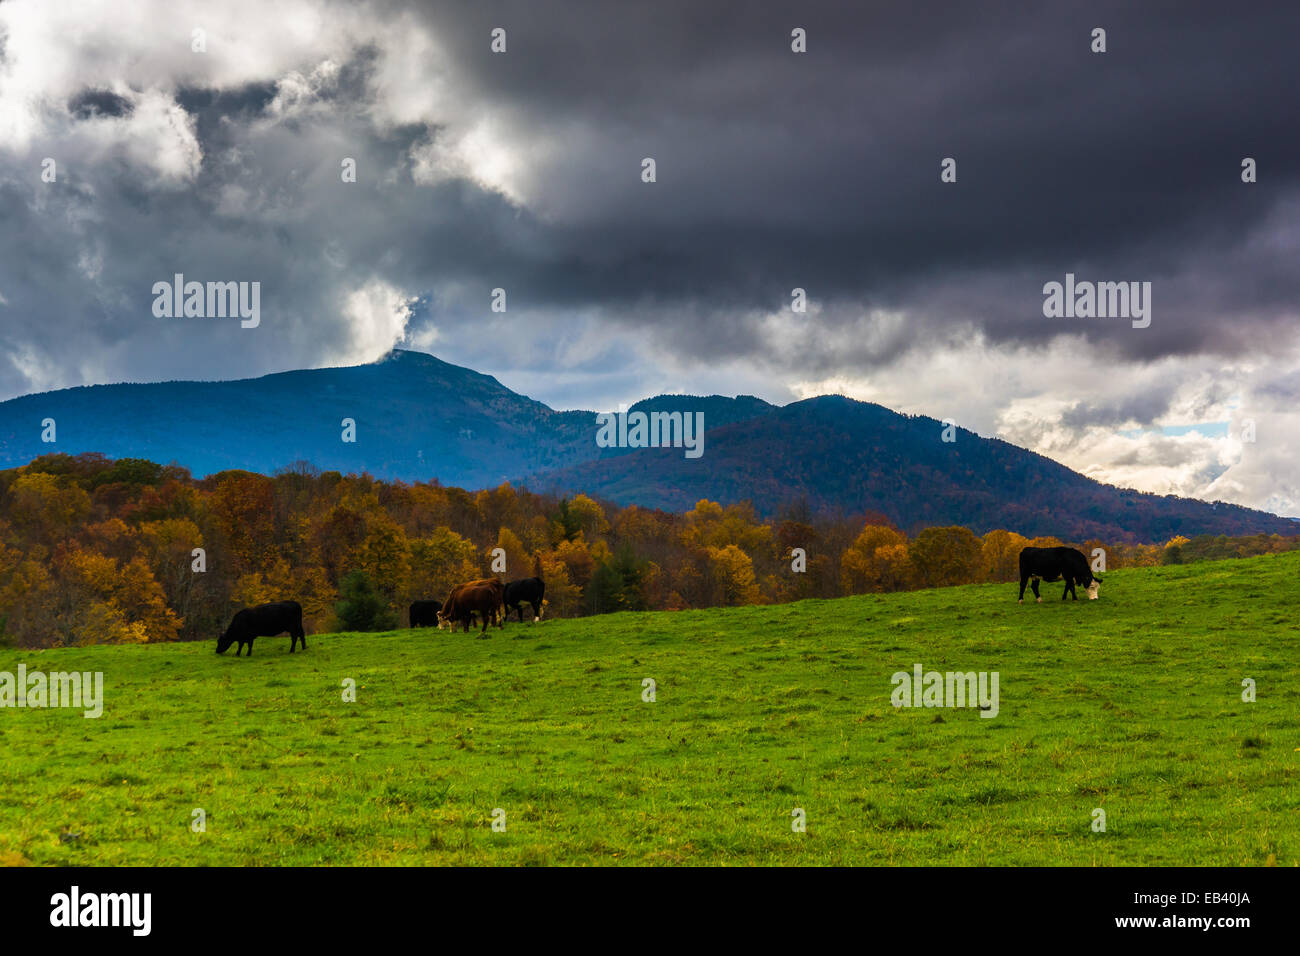 Cows in a farm field and view of Grandfather Mountain along the Blue Ridge Parkway in Moses Cone Park, North Carolina. Stock Photo